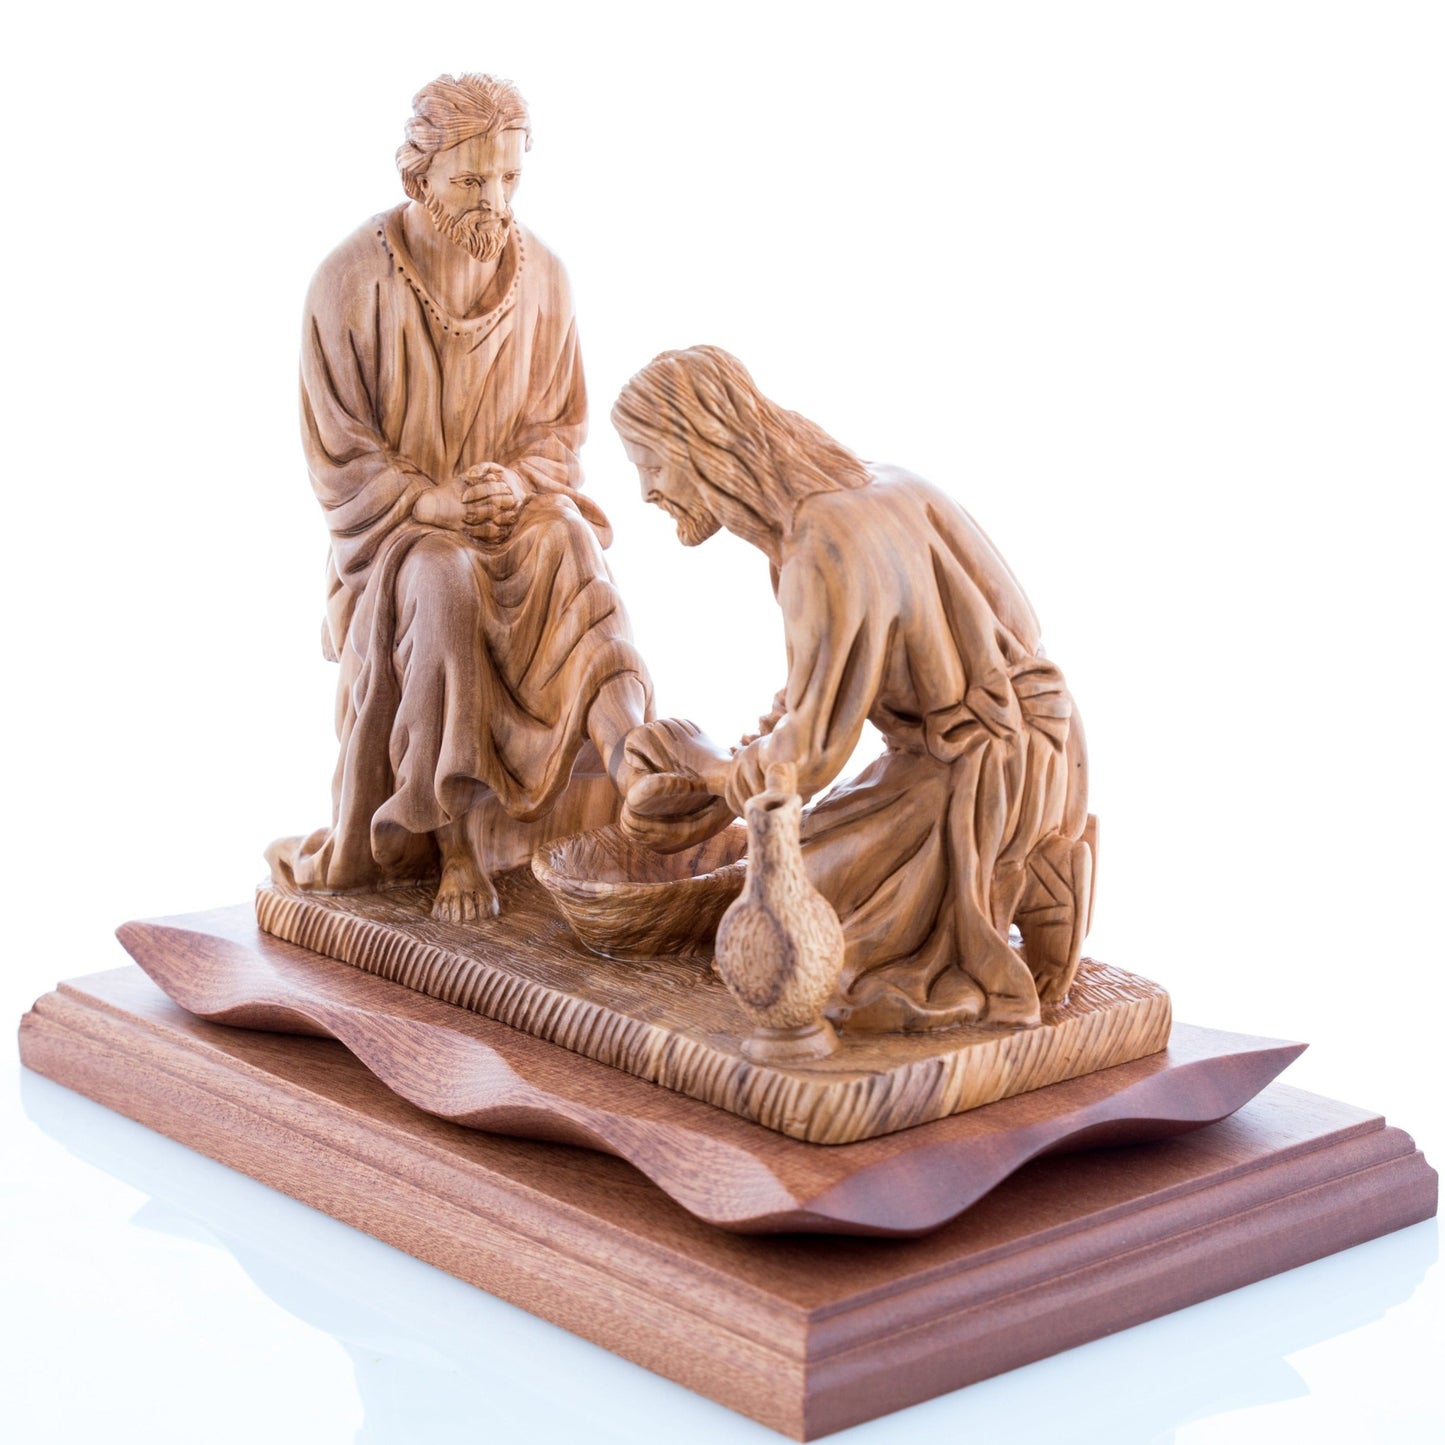 Jesus Christ " Washing The Feet" Masterpiece, 10.6" Olive Wood Carving